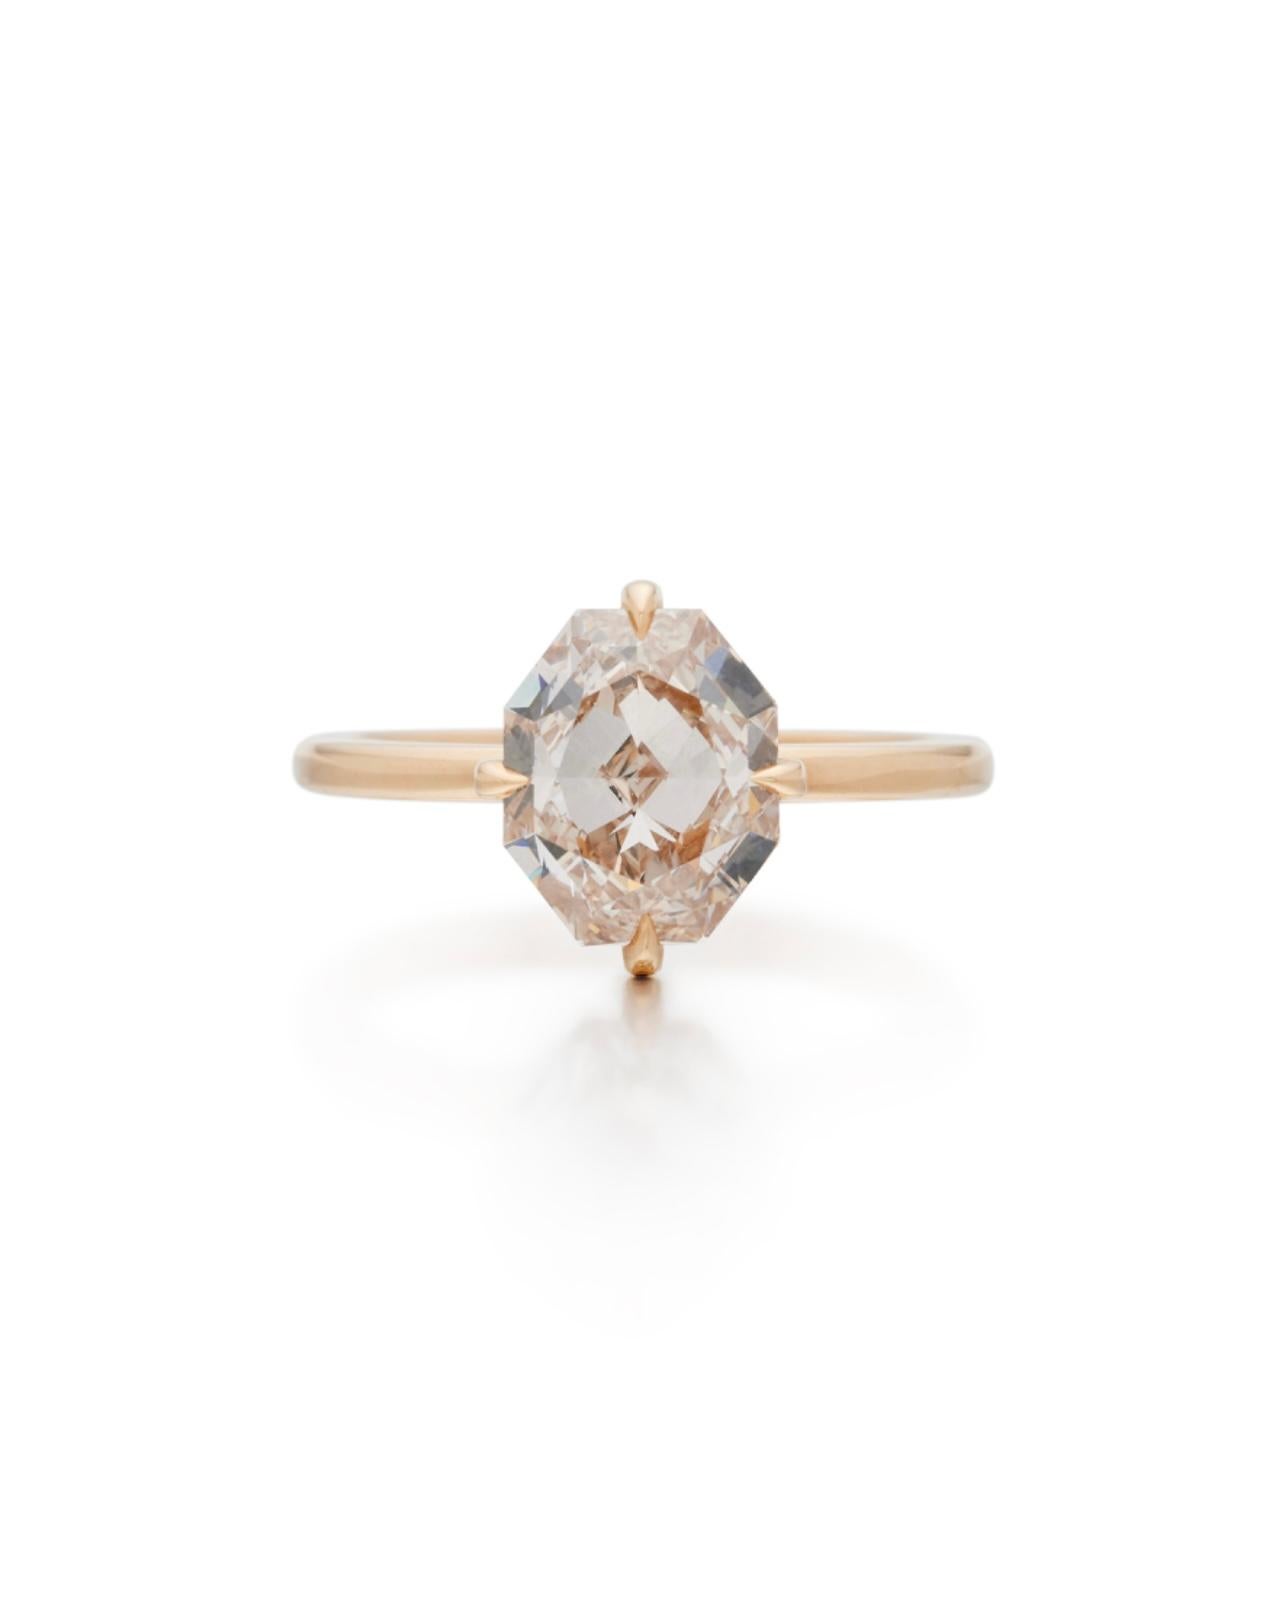 A gorgeous and unusual 2.37 carat Fancy light pinkish brown octagonal shaped diamond engagement ring. 

The details are as follows : 
Fancy light pinkish brown octagonal diamond weight : 2.37 carat 
Clarity : VVSI1 
Metal : 18 karat rose gold
Total